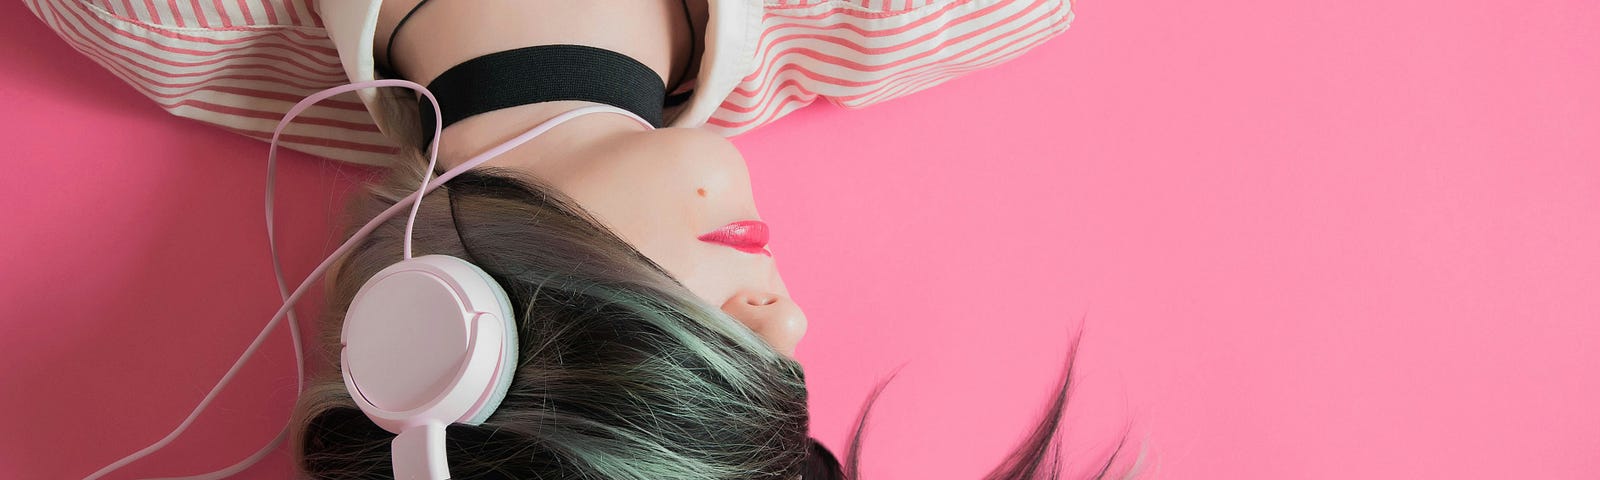 Attractive young woman lies down on pink background with pink headphones on. She wears a pink striped blouse and a black ribbon choker. Her hair swirls over her eyes, covering 1/3 of her face.